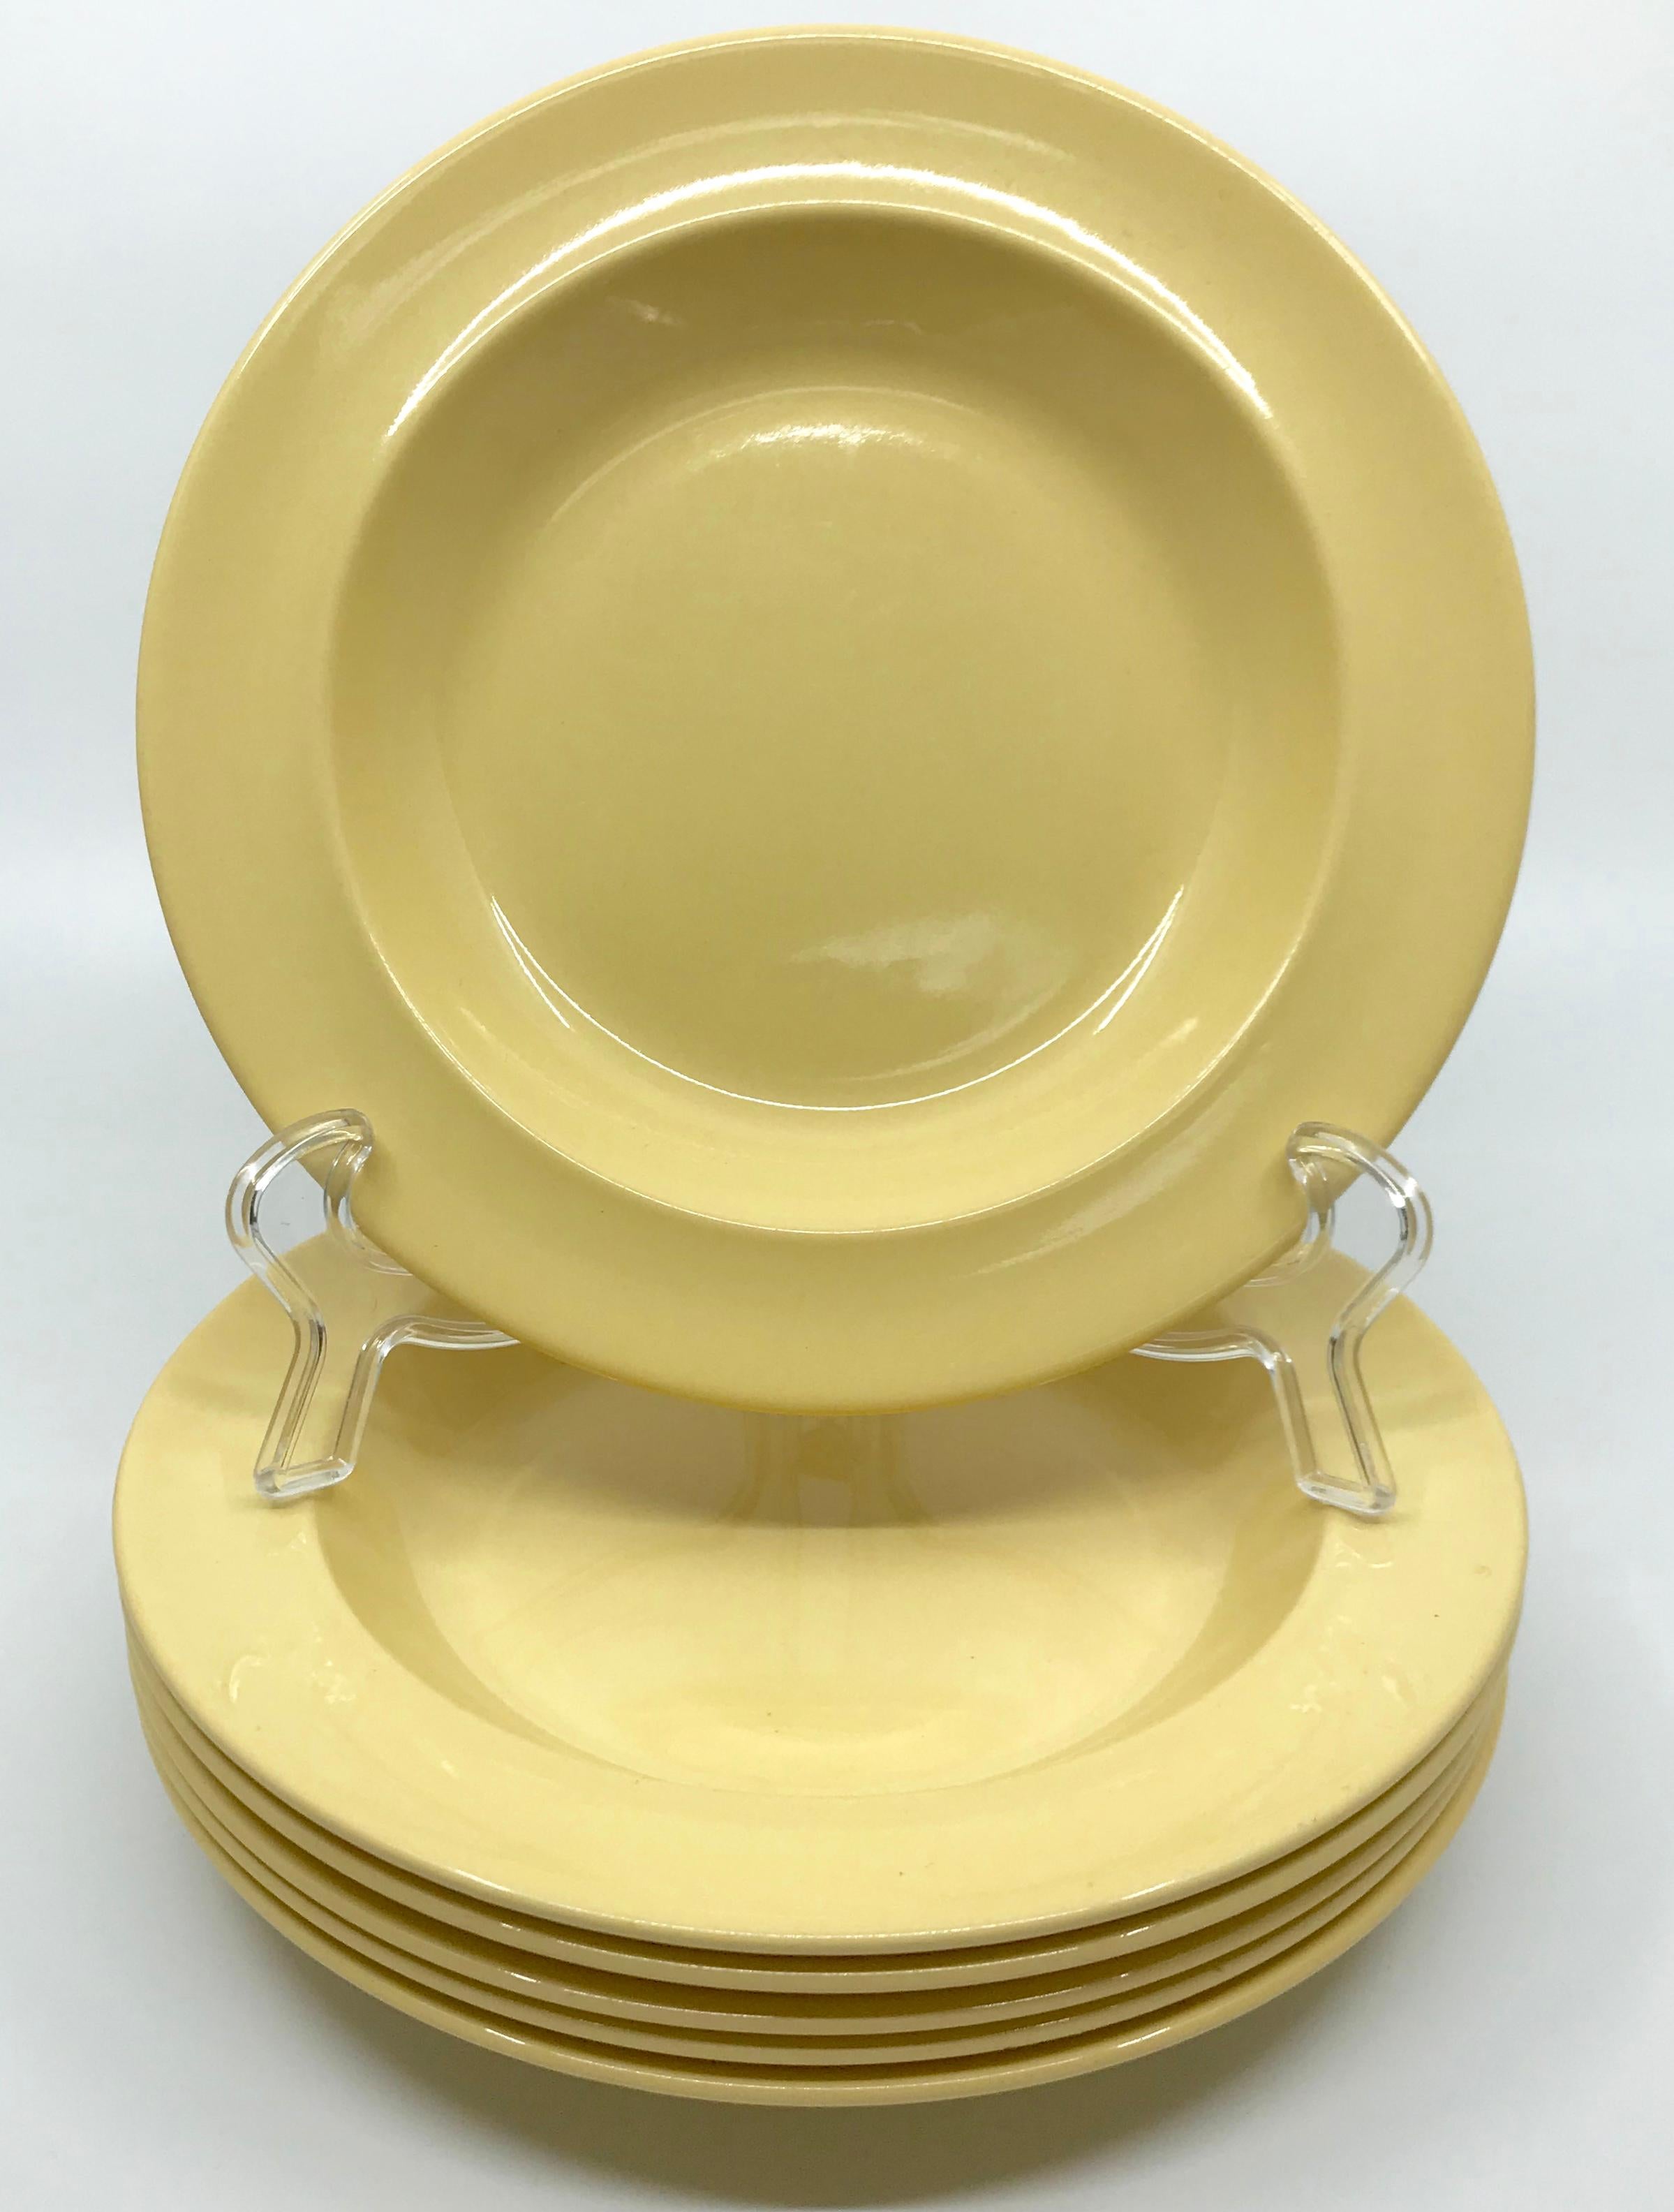 Set of six Wedgwood yellow plates. Six vintage creamware shallow bowls/plates in 